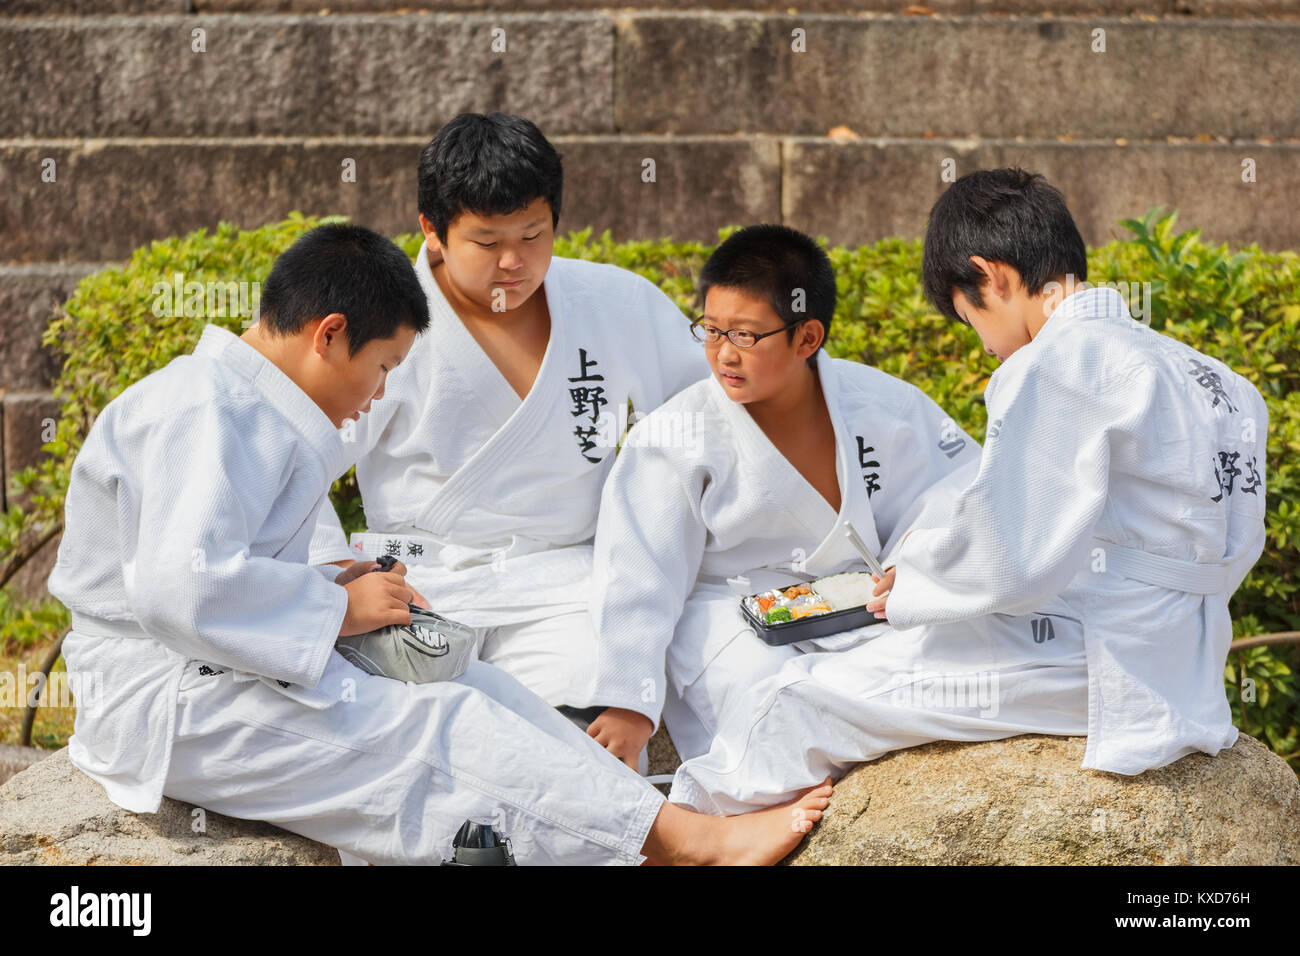 OSAKA, JAPAN - OCTOBER 25: Shudokan Hall in Osaka, Japan on October 25, 2014. Unidentified Japanese students have lunch while attending the Judo class Stock Photo